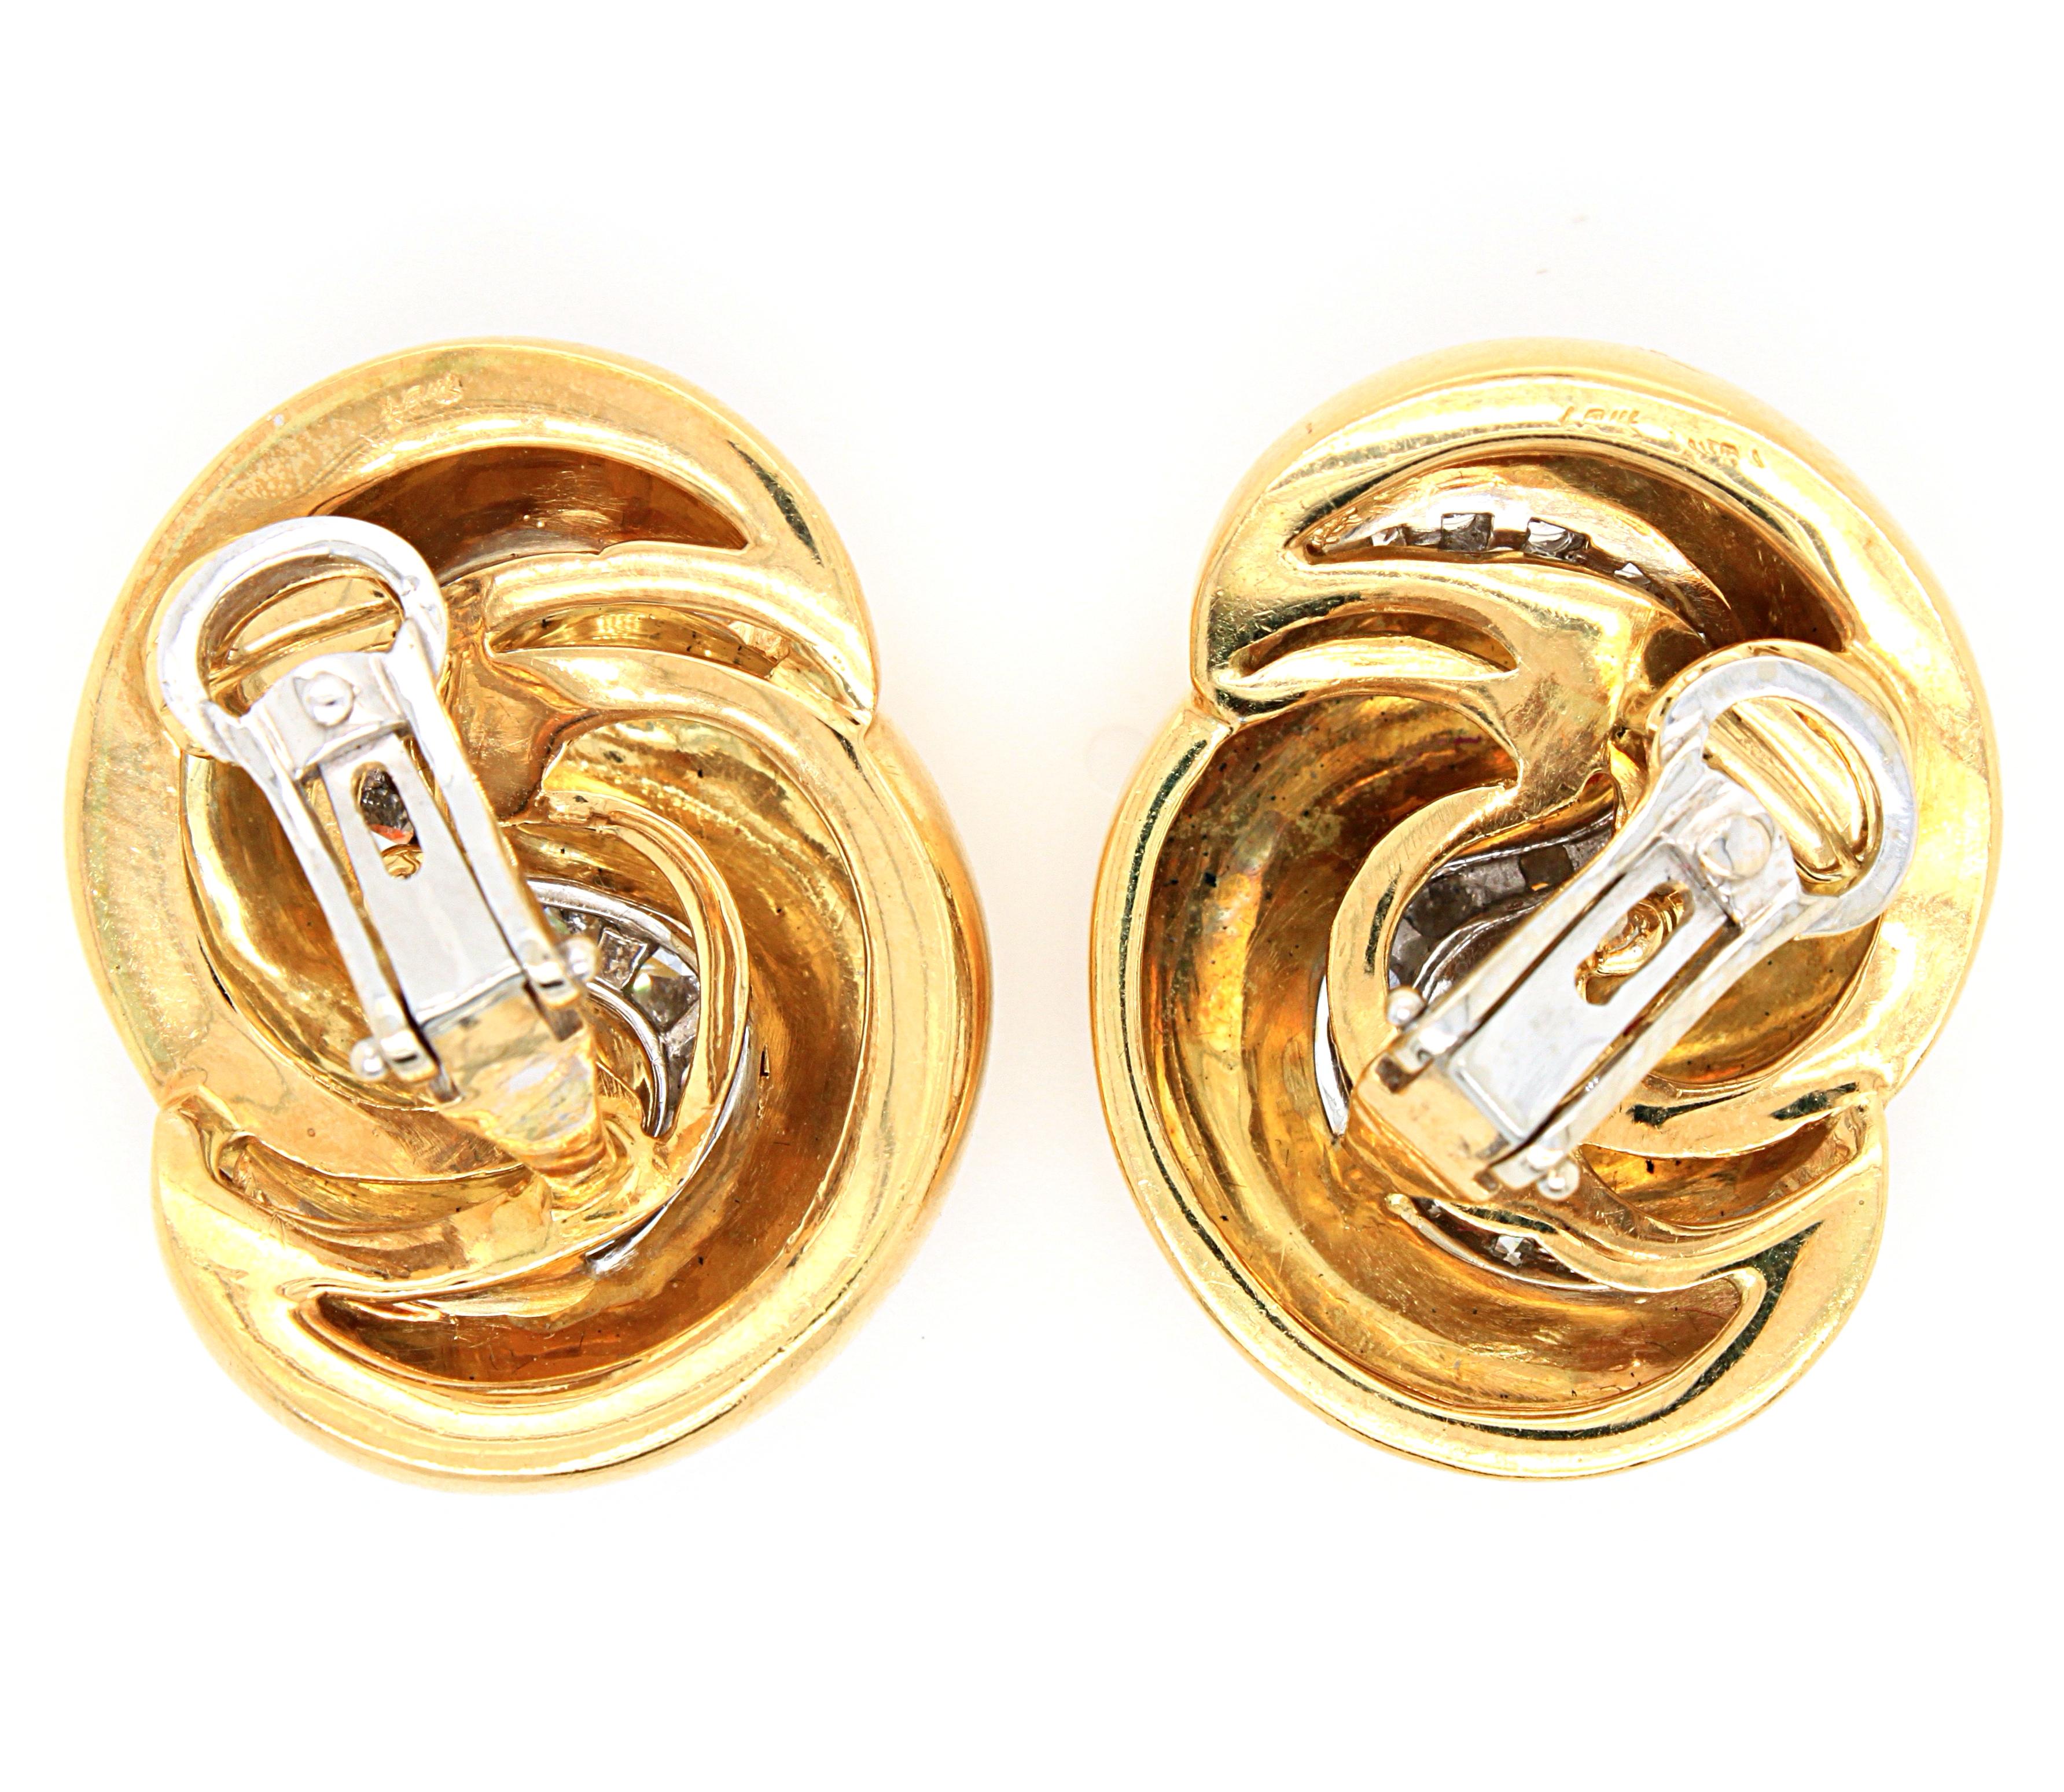 Diamond and Gold Bombé Earclips In Excellent Condition For Sale In Idar-Oberstein, DE